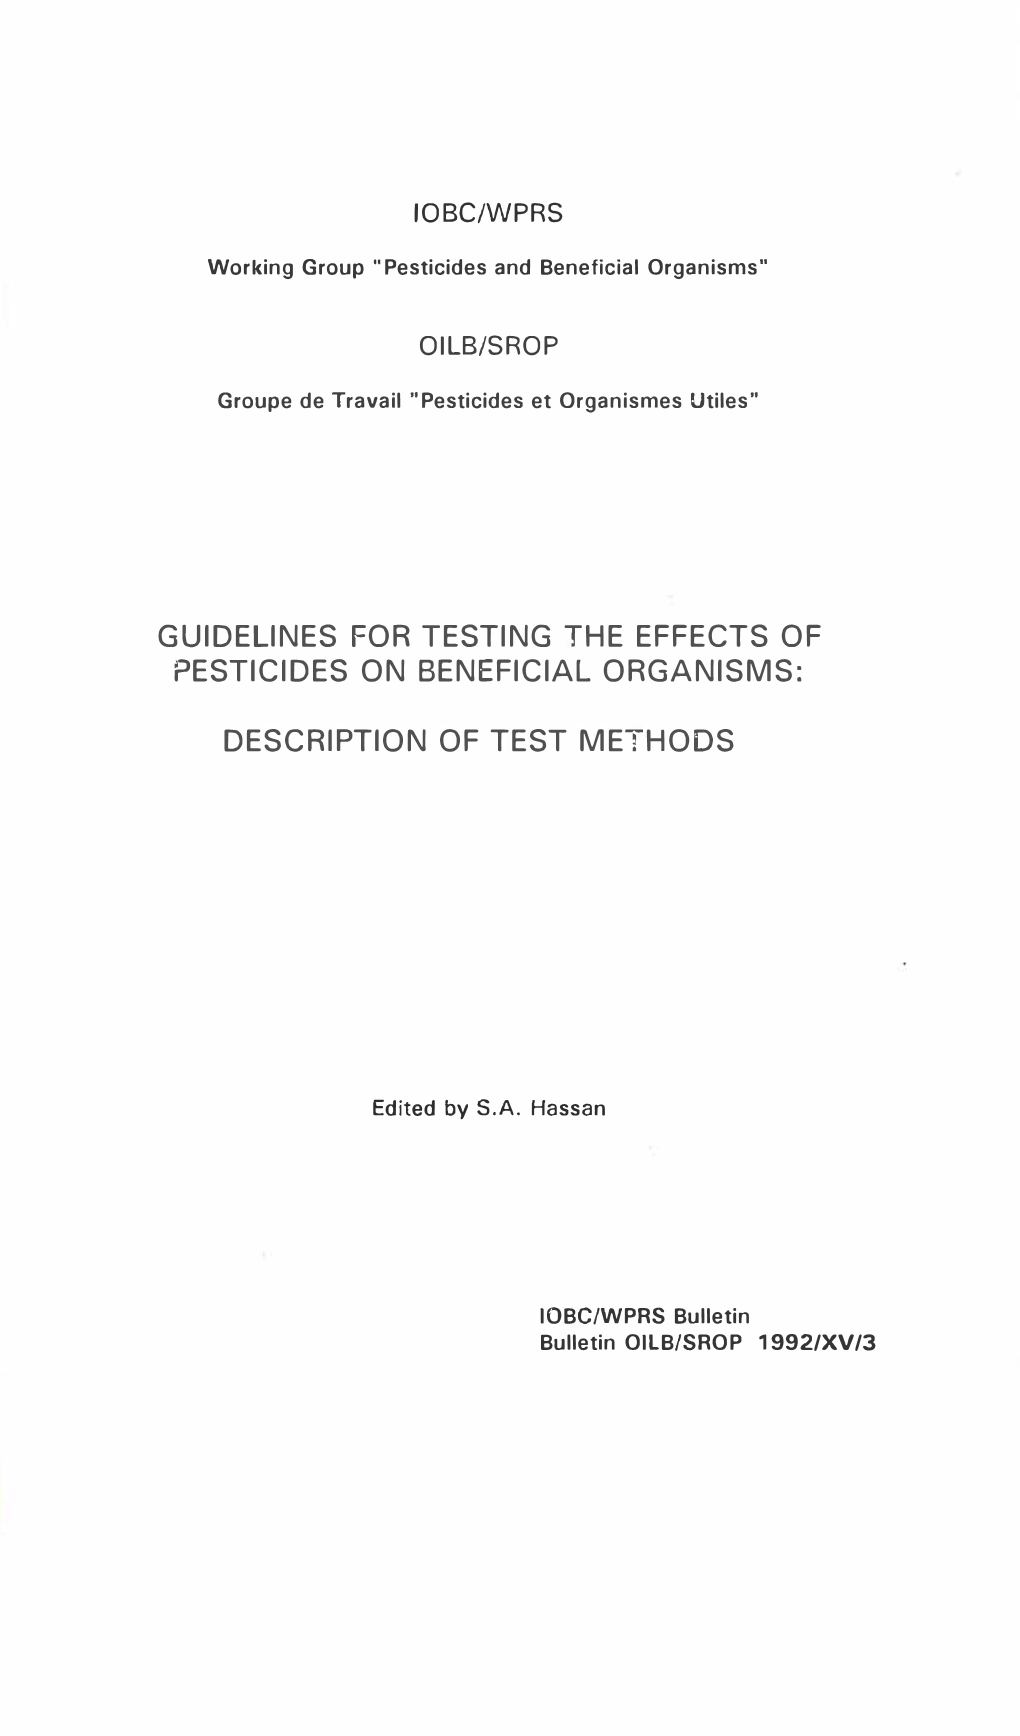 Guidelines for Testing the Effects of Pesticides on Beneficial Organisms